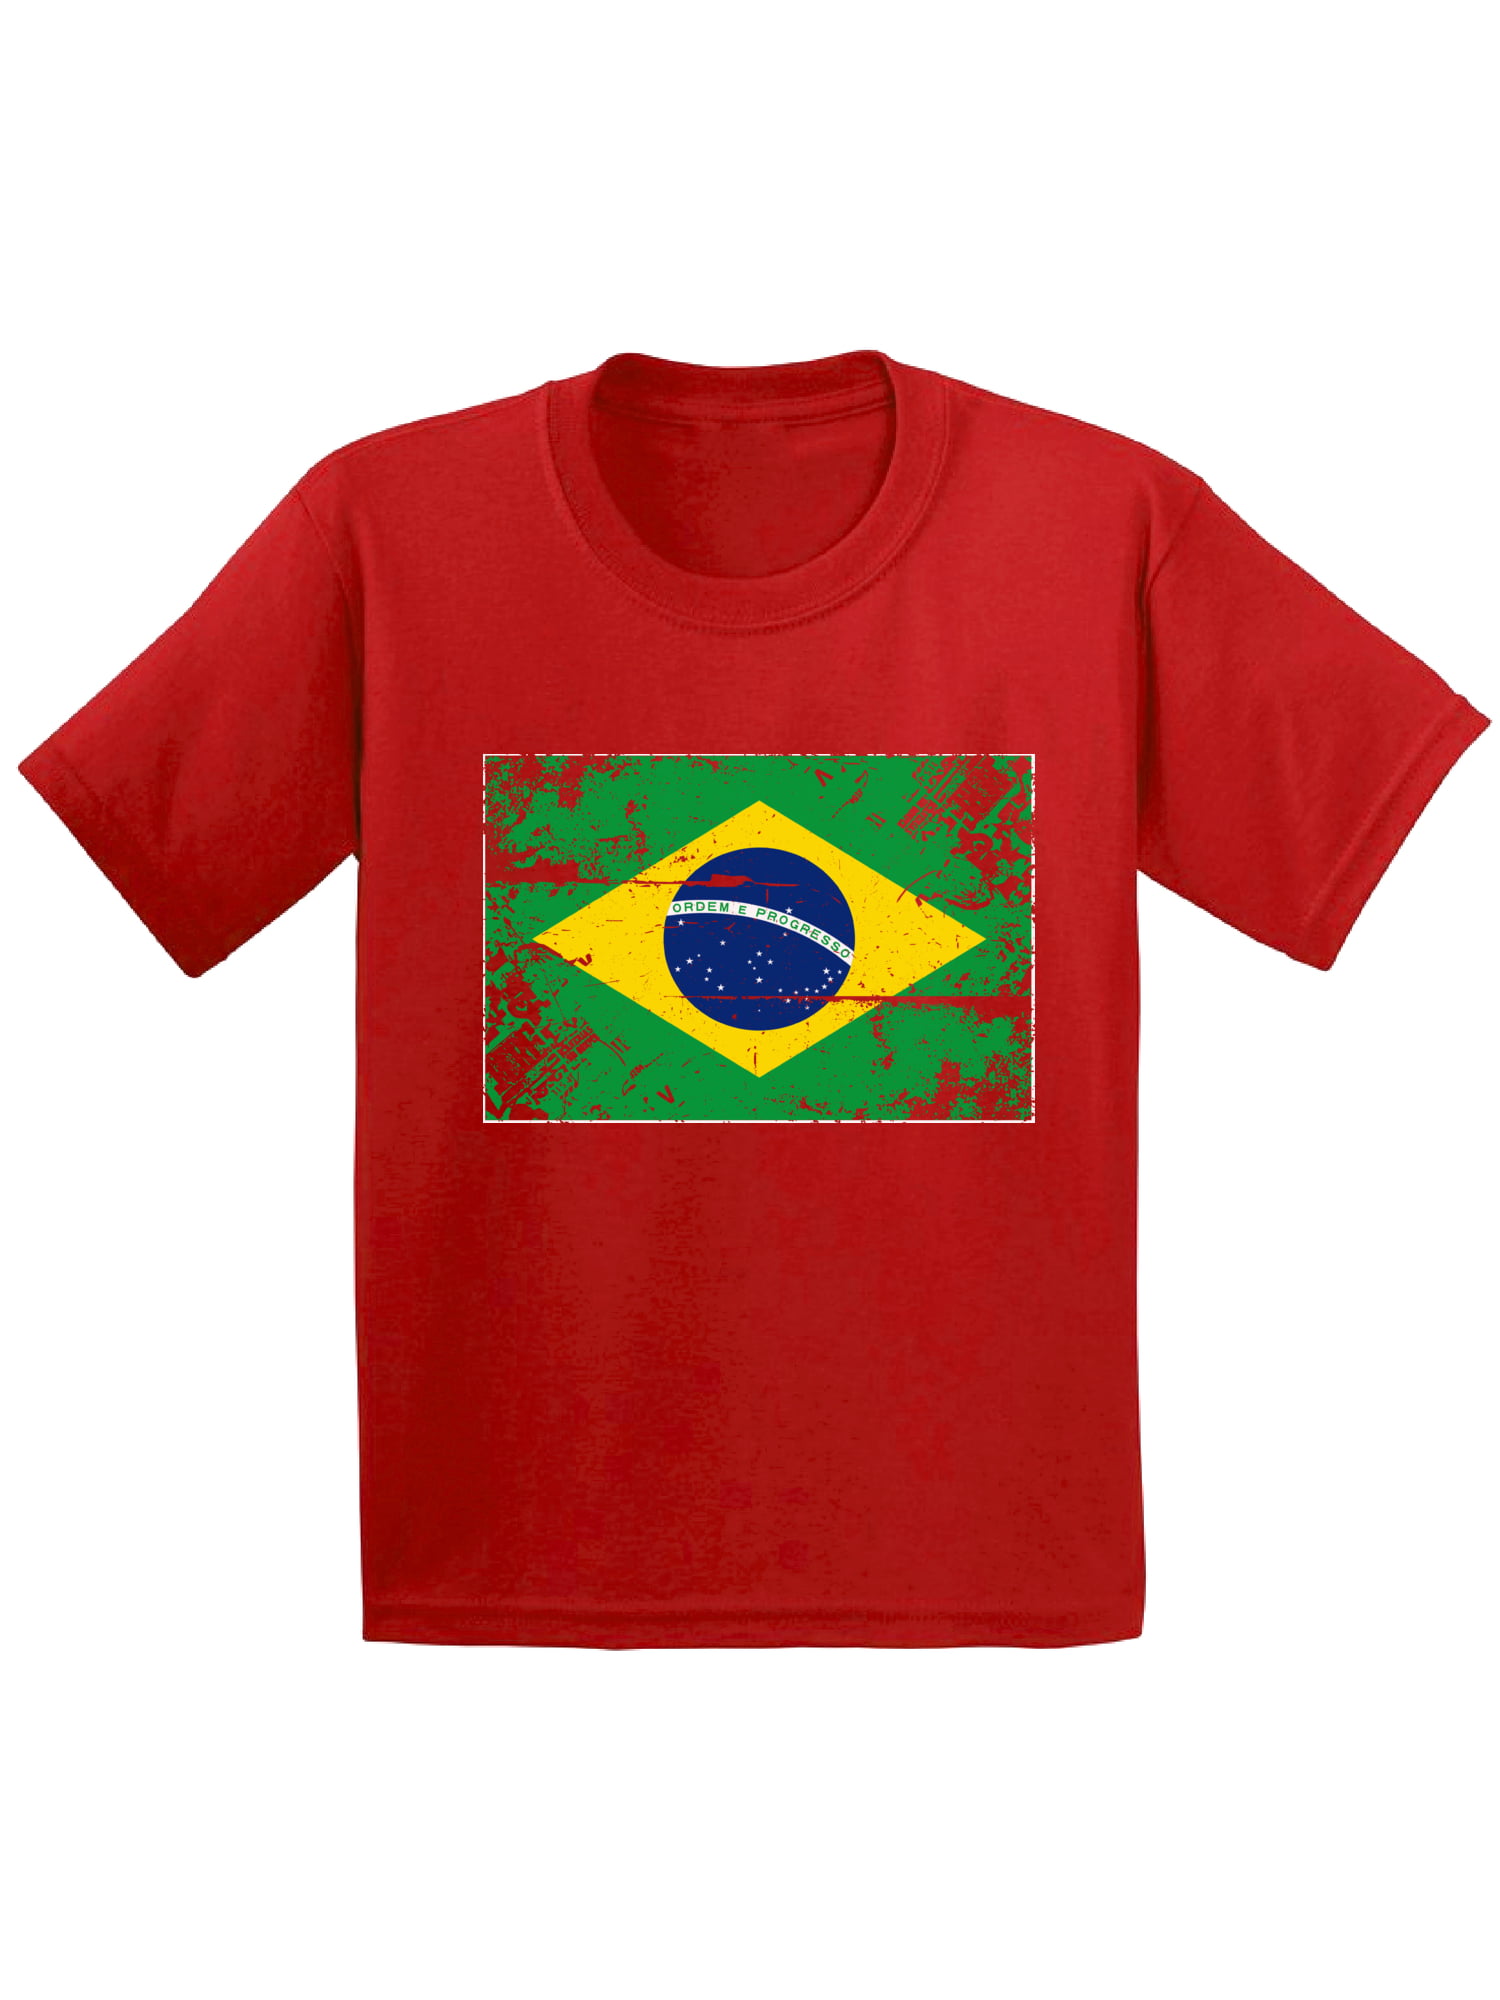 Food Lover Toddler Tee BRAZILIAN MIXED WITH Kids T-shirt Brazil Gift Idea Unisex Youth Shirt